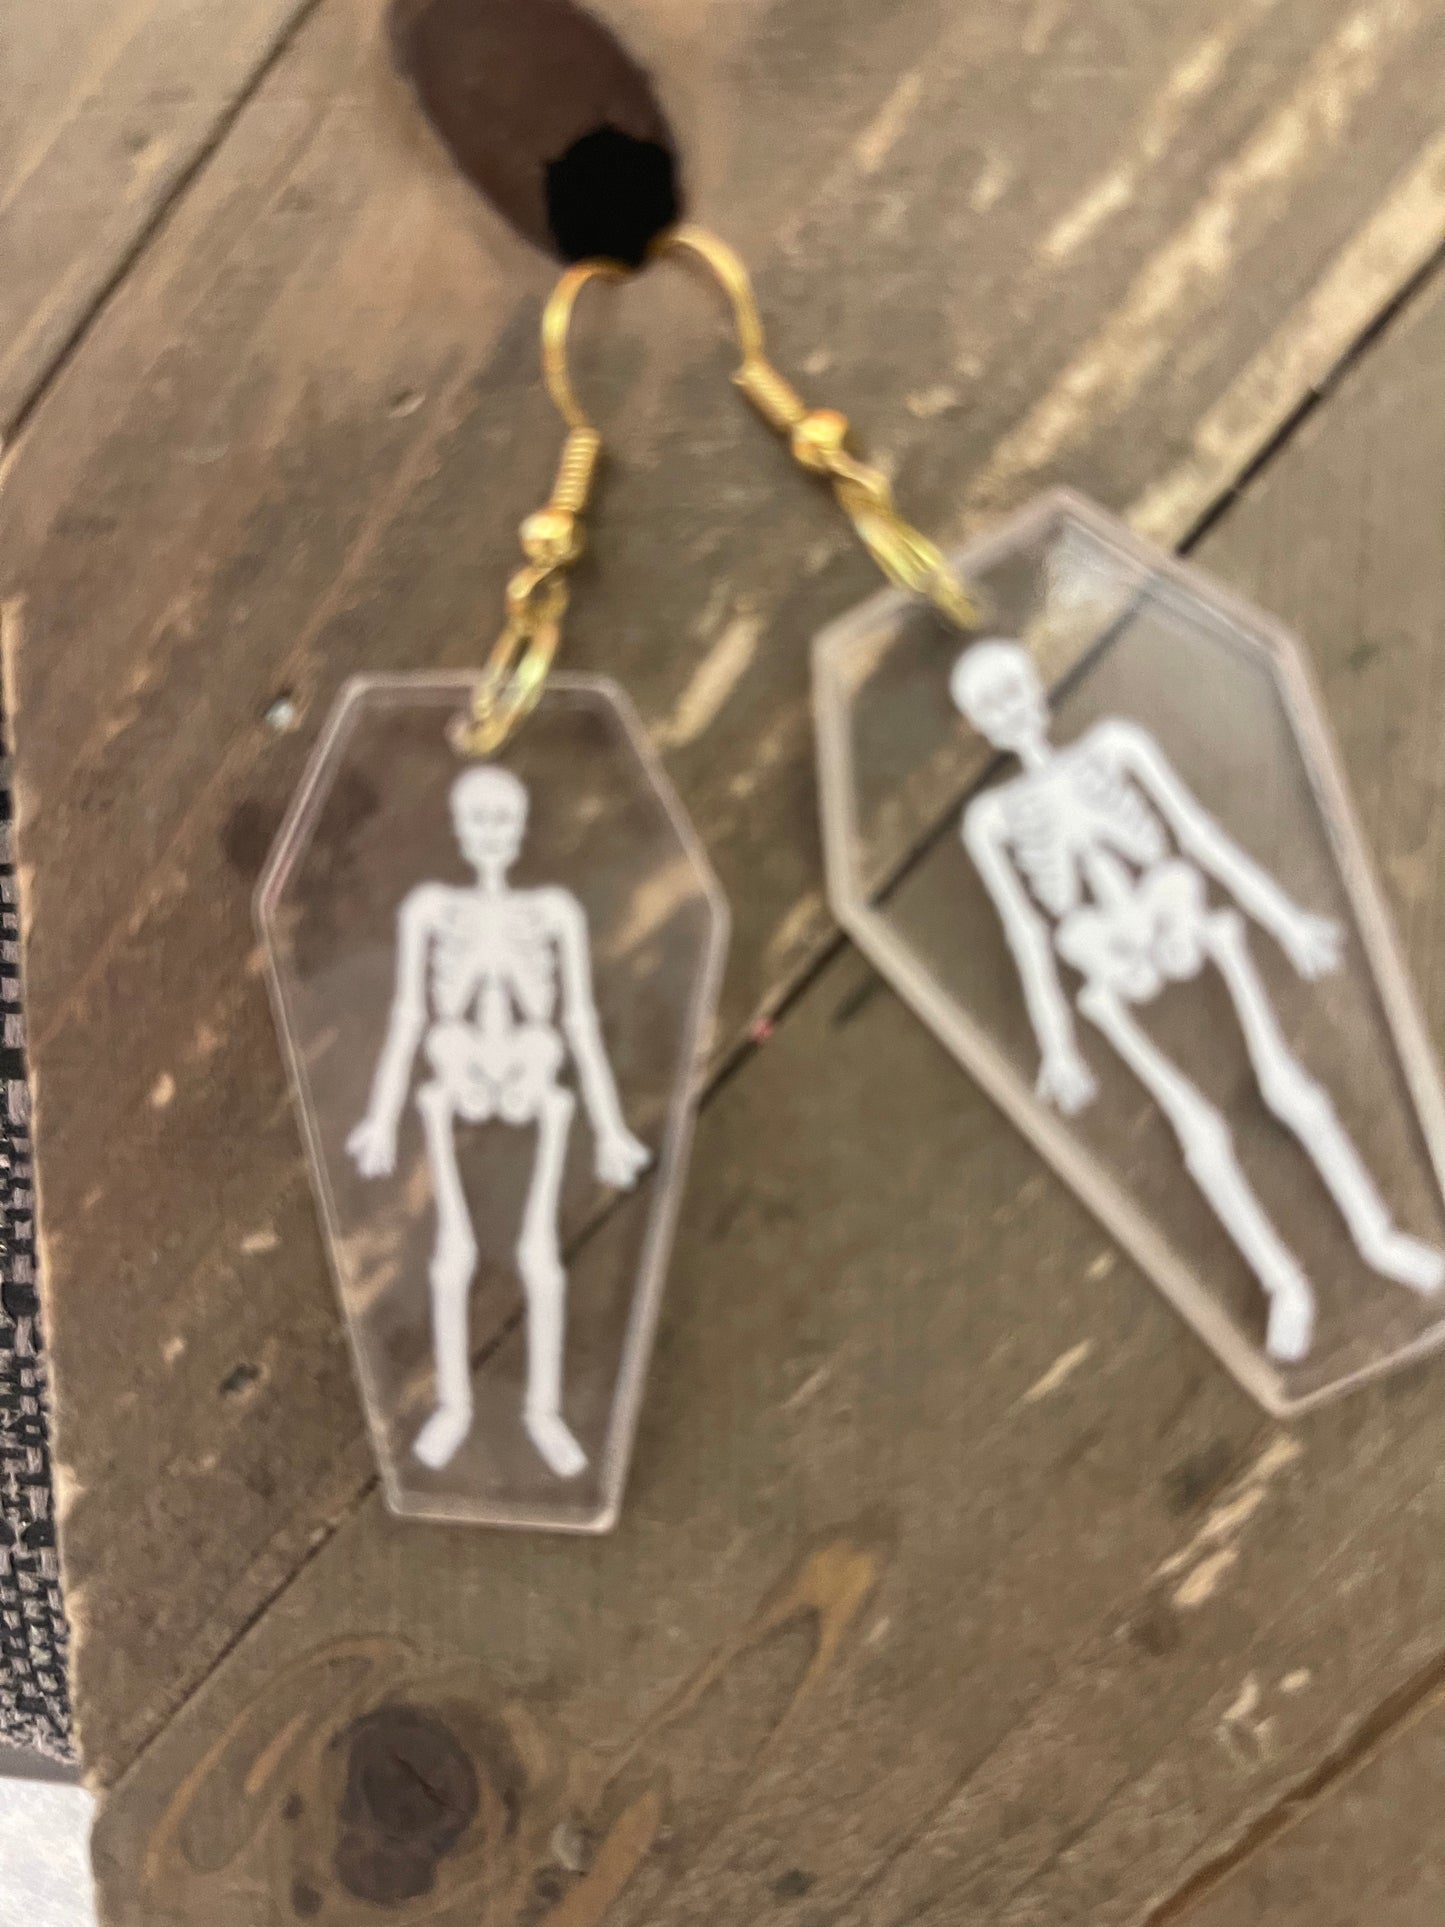 Skeleton in a Acrylic coffin charm wire earringsPink tiful of LOVE